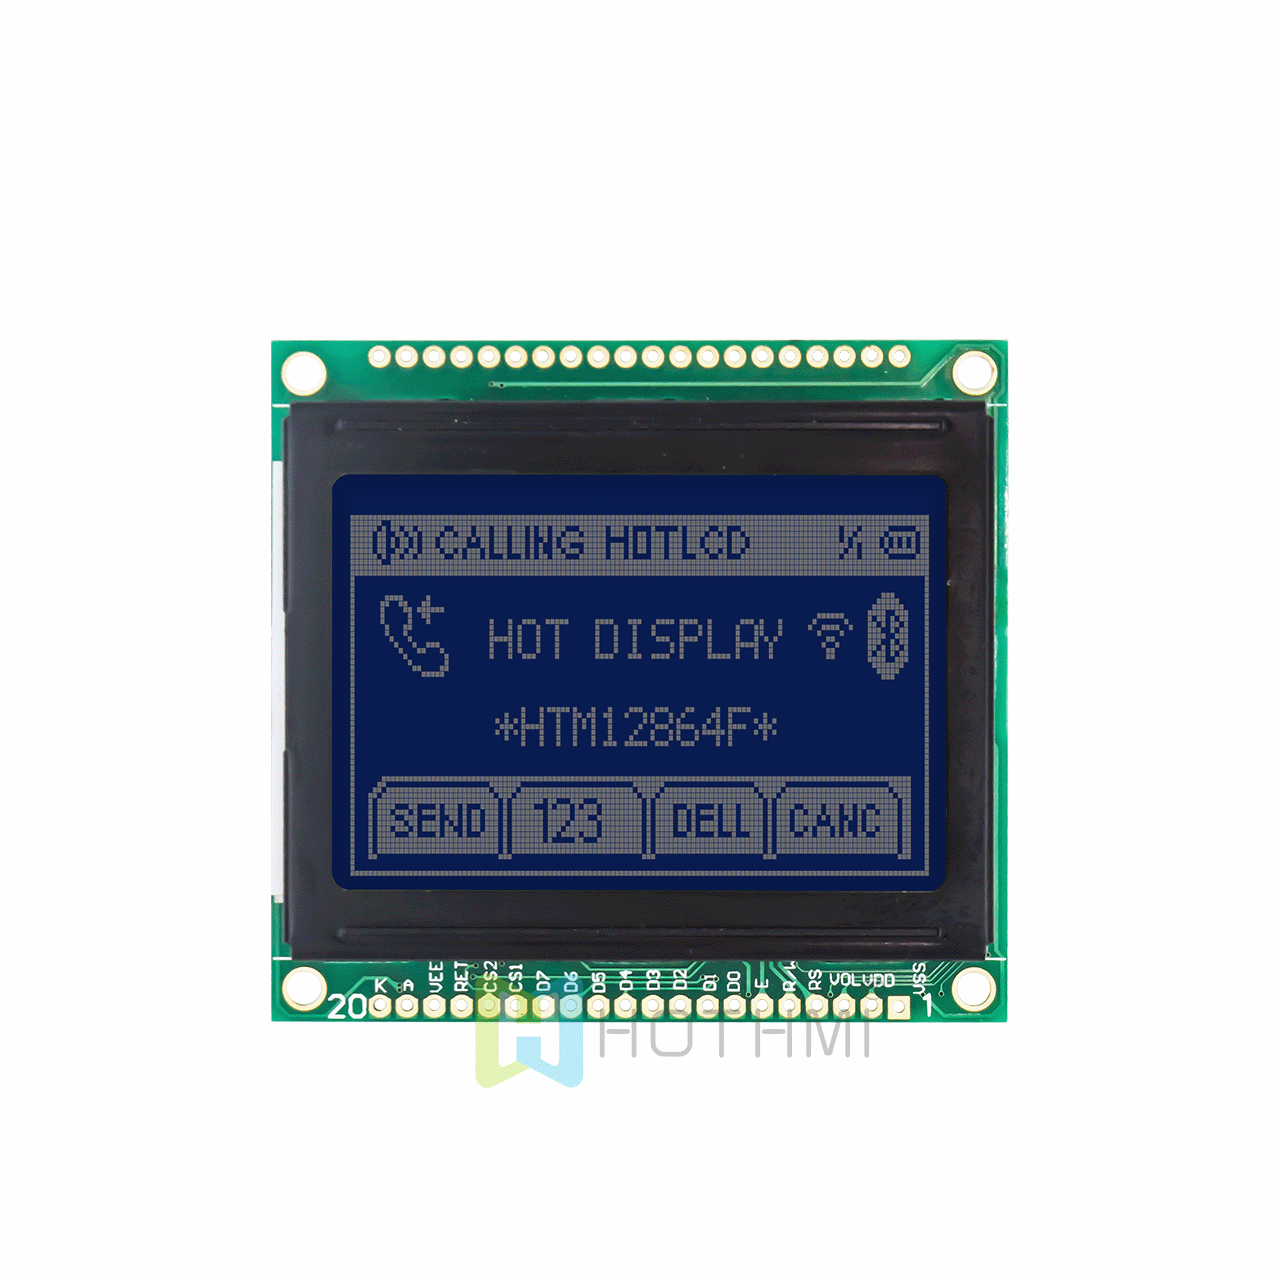 2-inch LCD12864 LCD screen/LCM128x64 graphic dot matrix module/white text on blue background/multiple language fonts/STN negative display